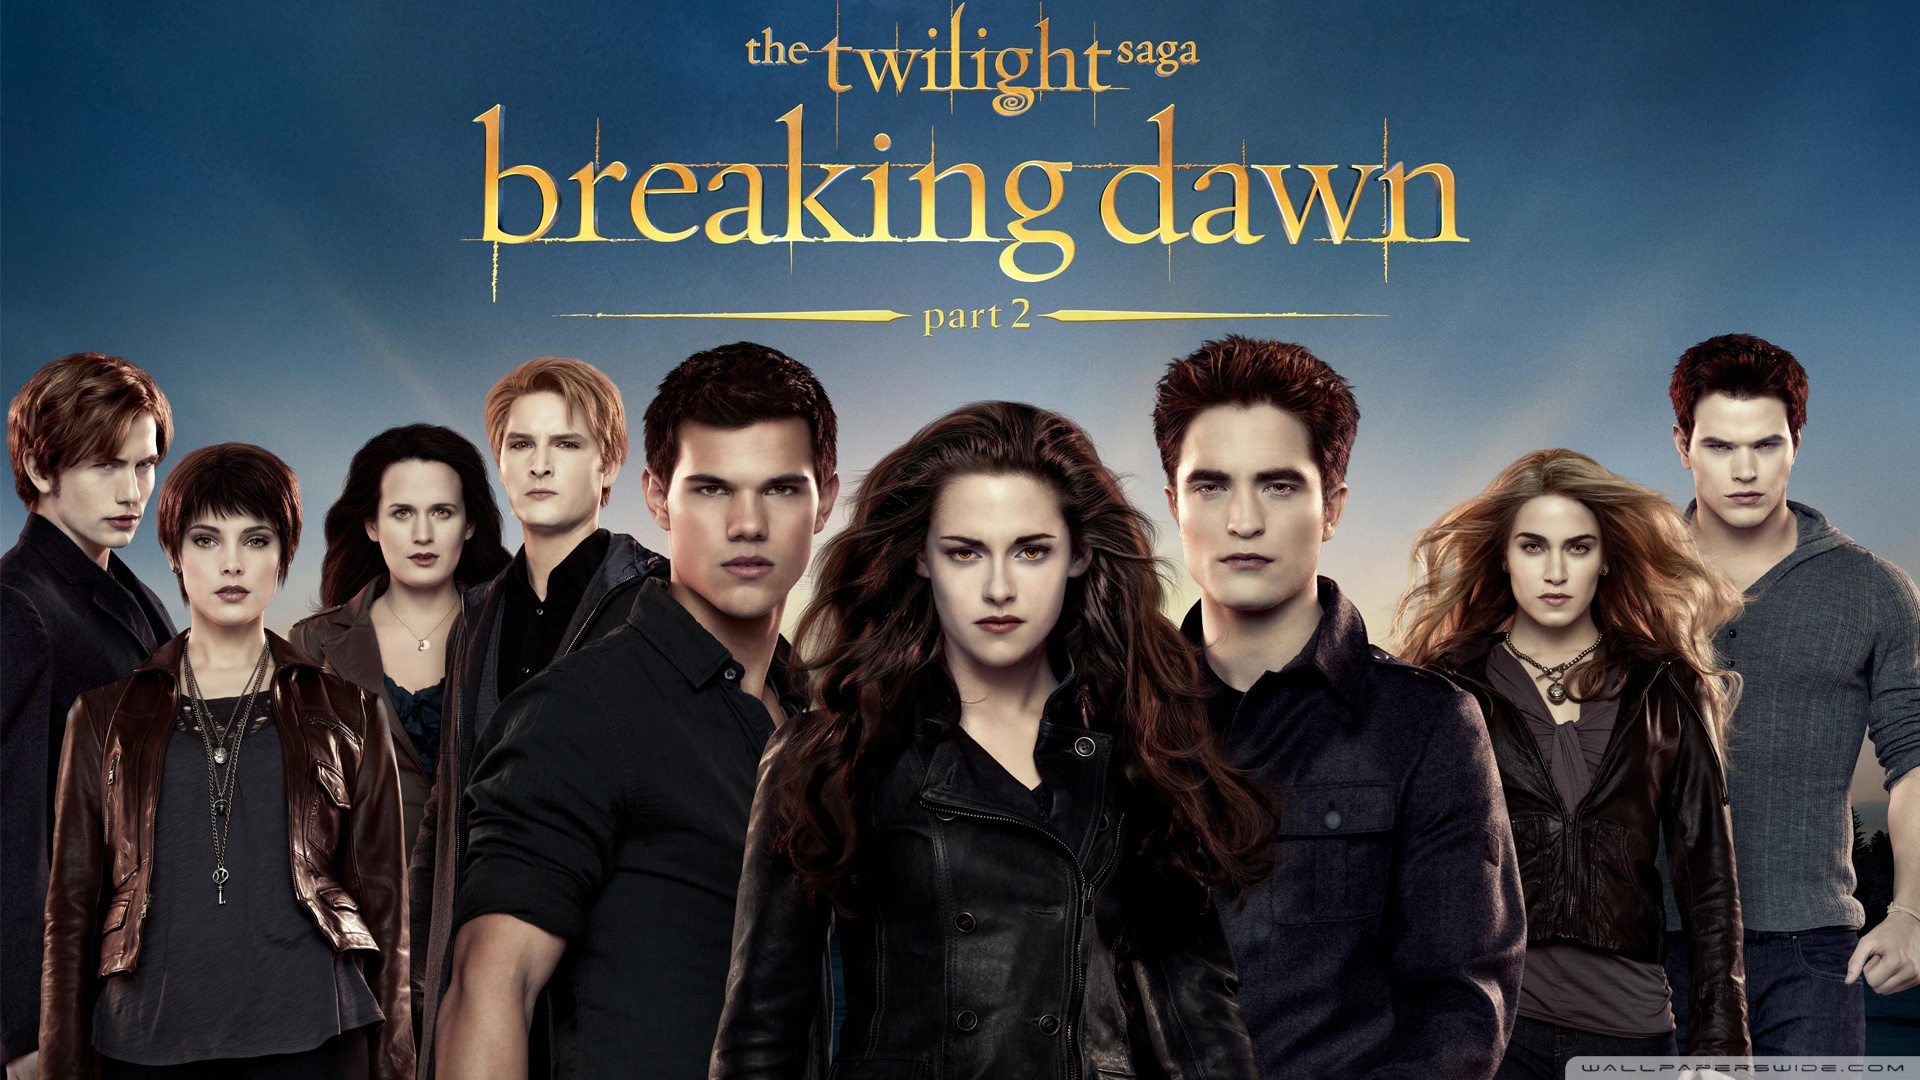 download twilight breaking dawn part 2 in hindi dubbed